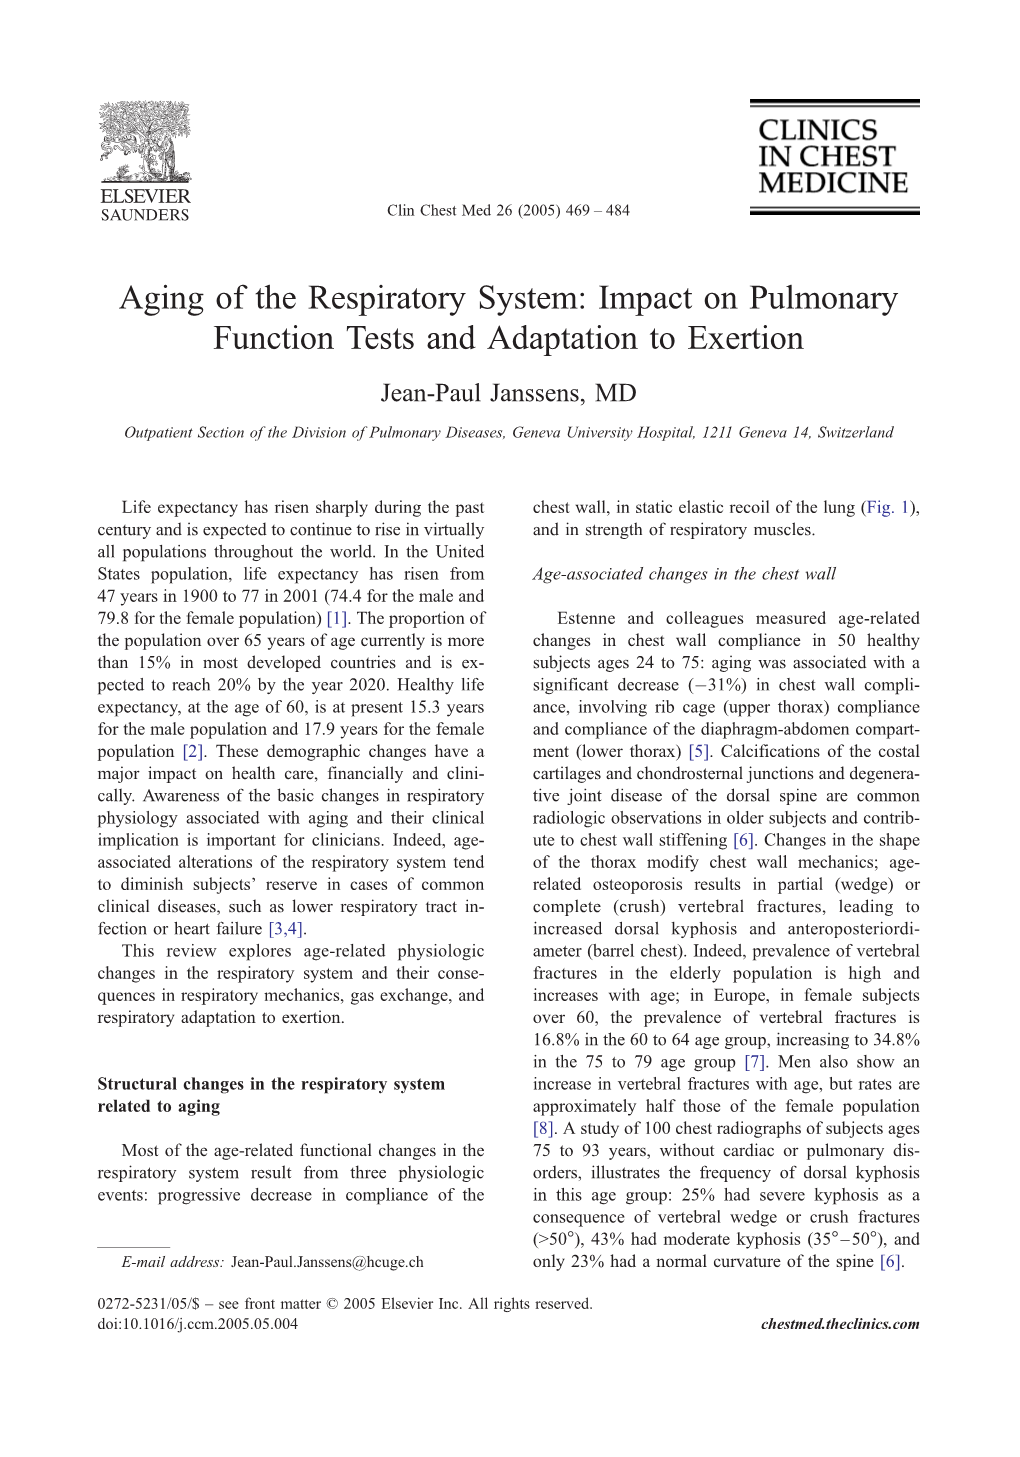 Aging of the Respiratory System: Impact on Pulmonary Function Tests and Adaptation to Exertion Jean-Paul Janssens, MD